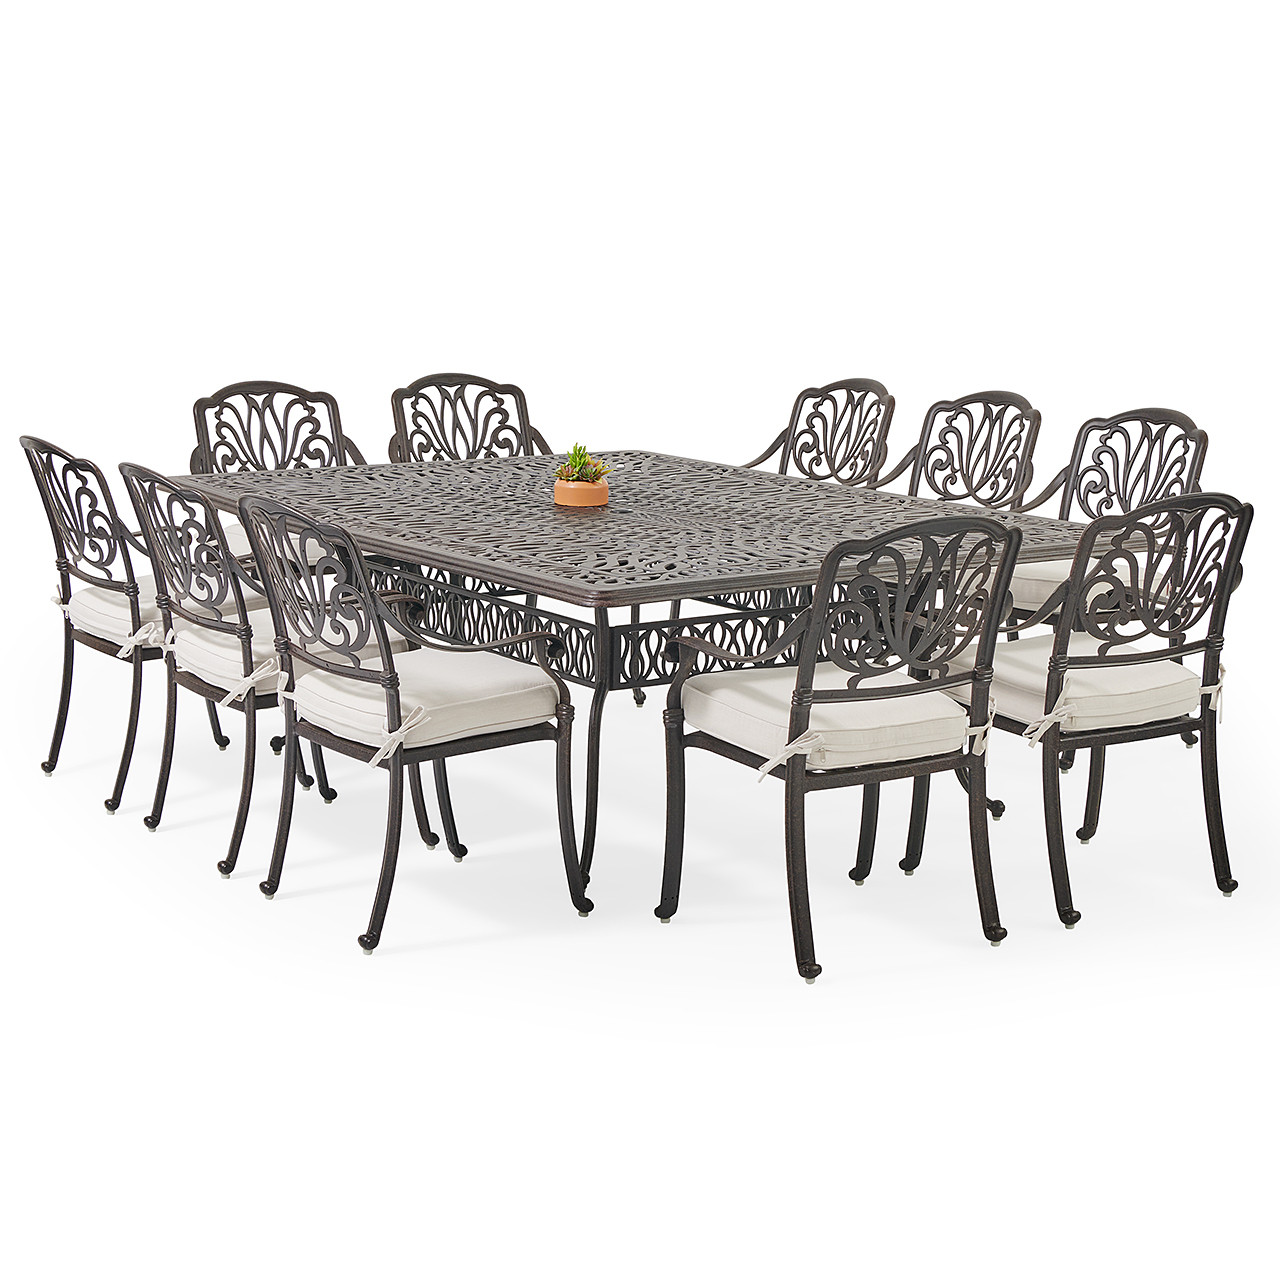 Cadiz Cast Aluminum with Cushions 11 Piece Dining Set + 90 x 64 in. Table